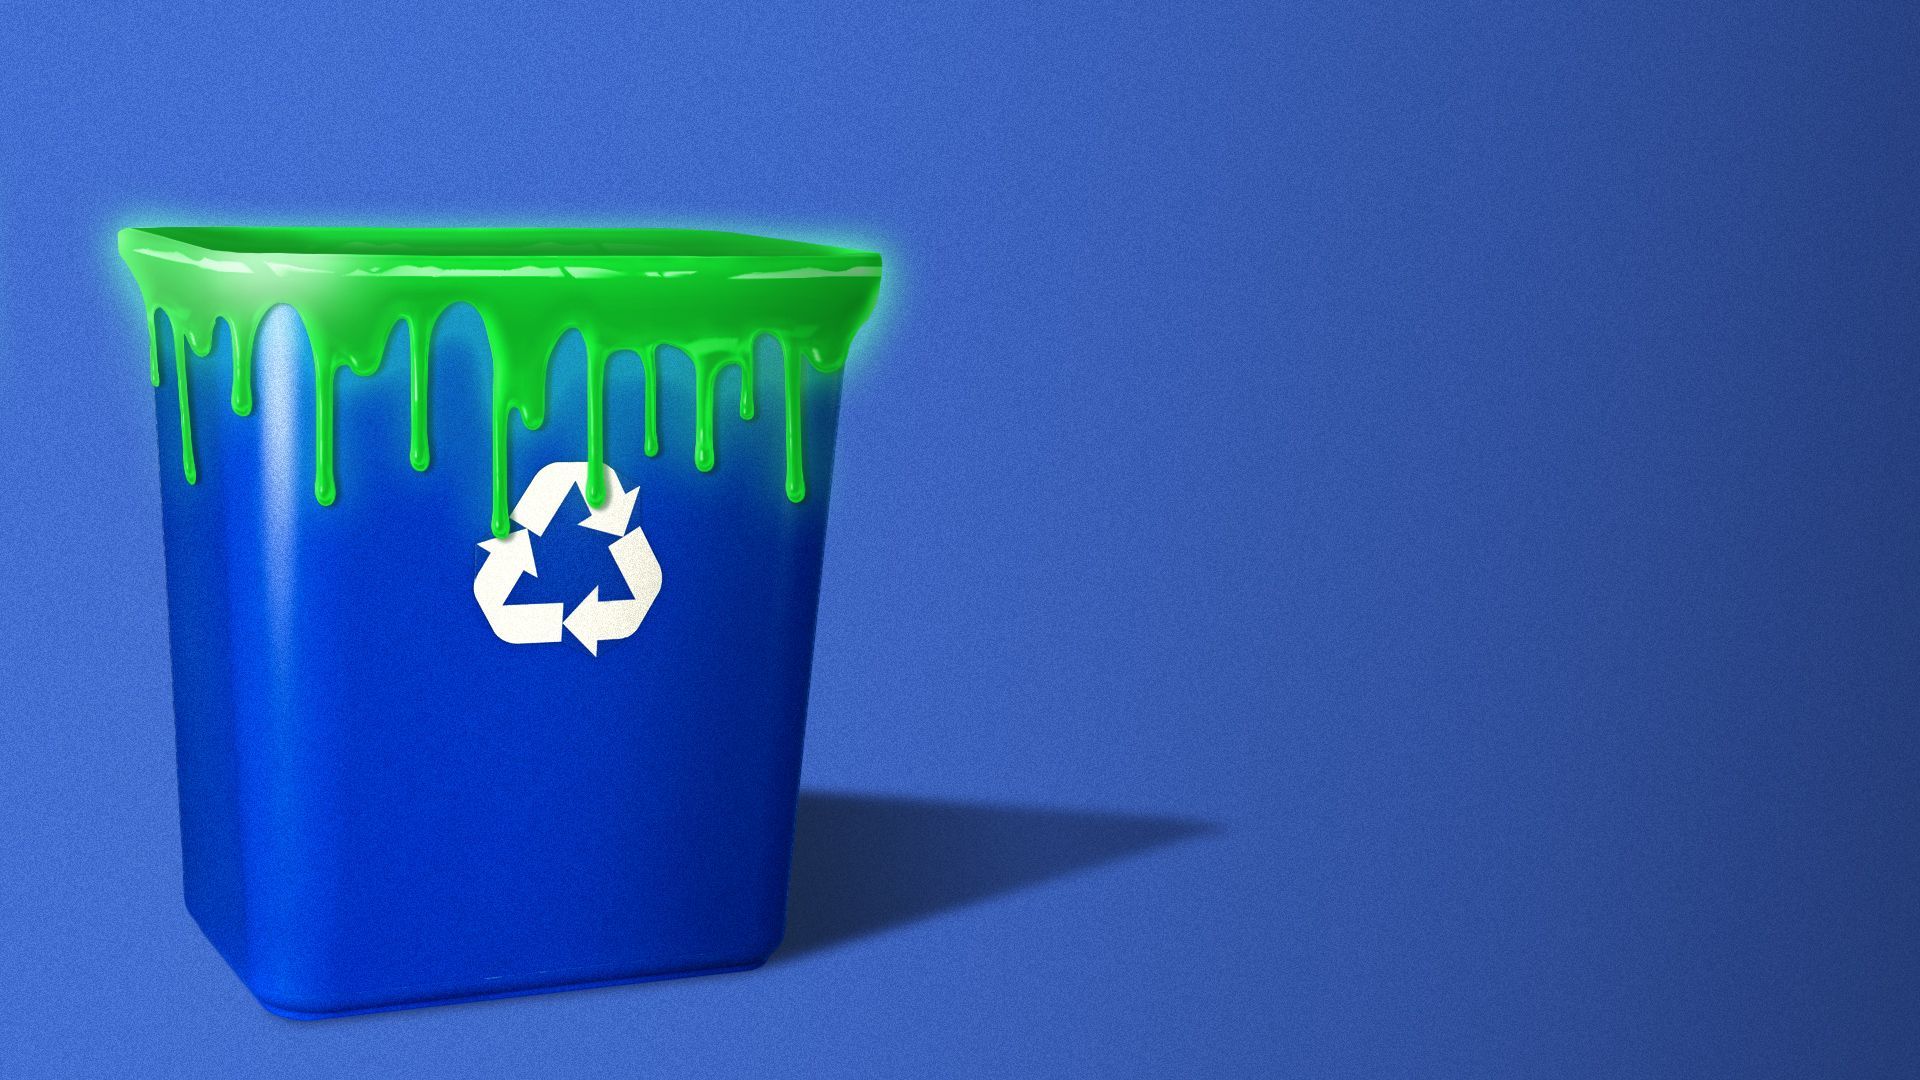 Illustration of a recycling bin with green radioactive drips around the top.